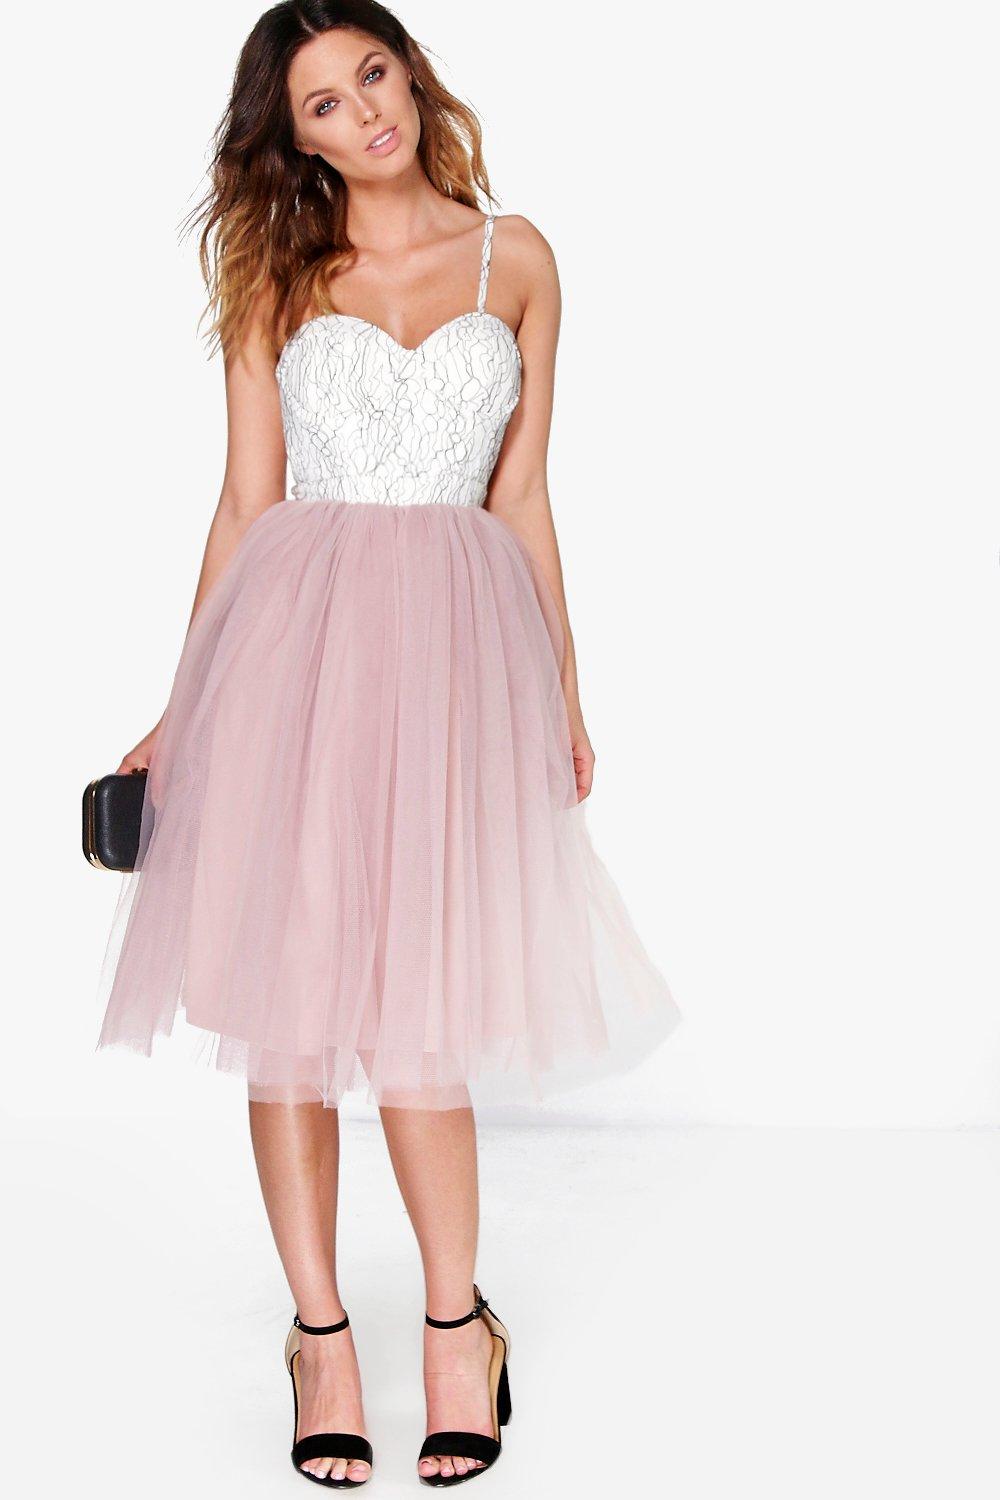 Boutique Ana Corded Lace Tulle Prom 